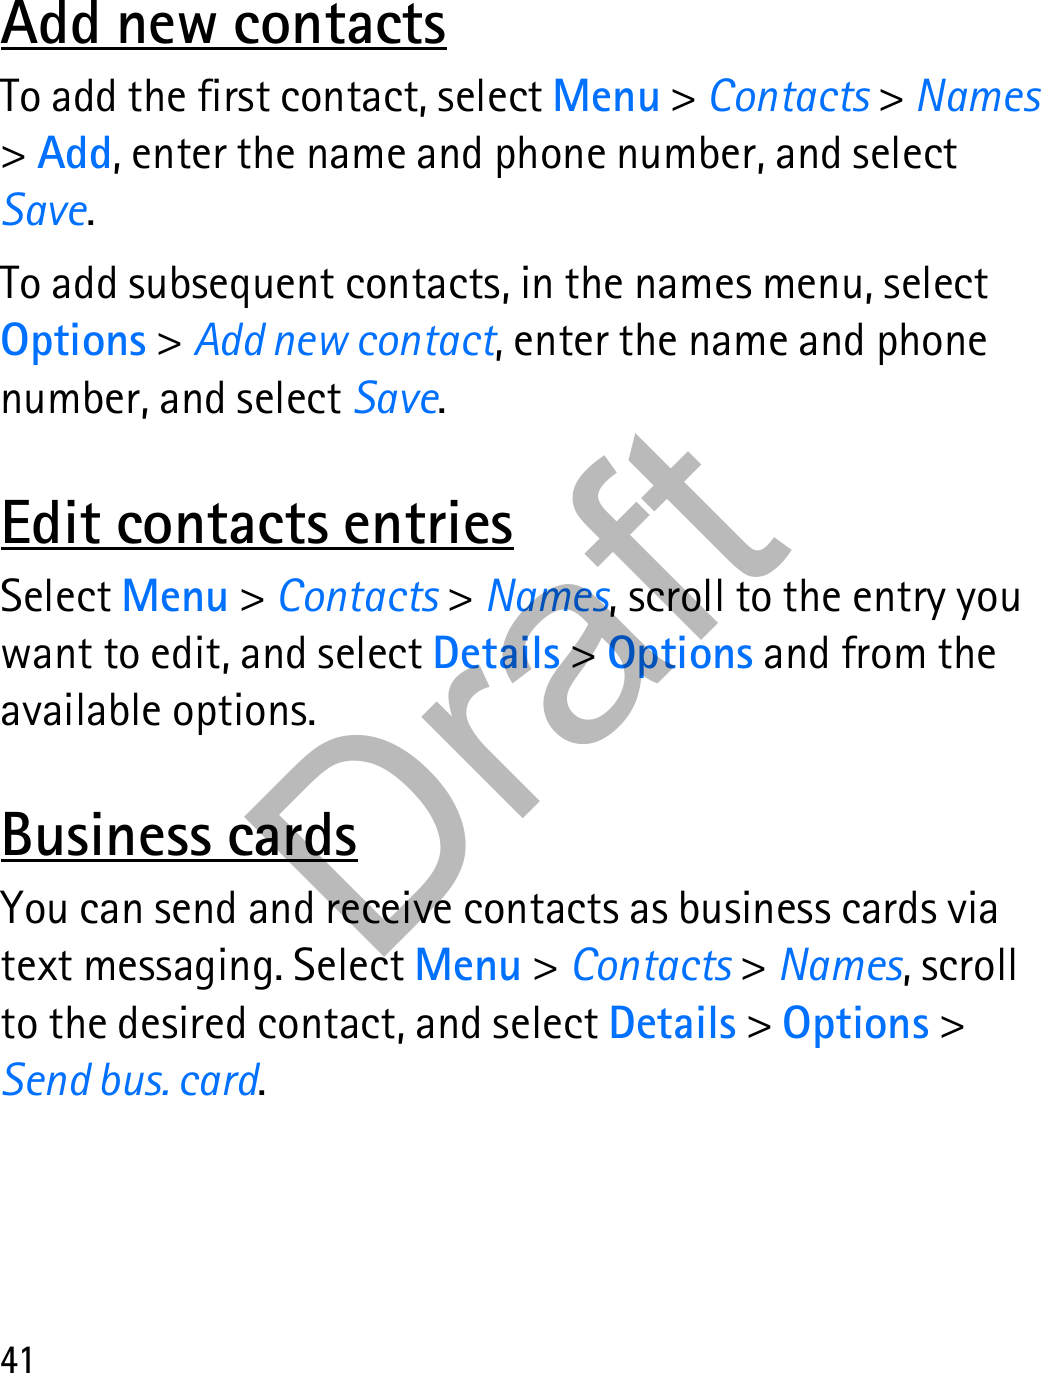 41Add new contactsTo add the first contact, select Menu &gt; Contacts &gt; Names &gt; Add, enter the name and phone number, and select Save.To add subsequent contacts, in the names menu, select Options &gt; Add new contact, enter the name and phone number, and select Save.Edit contacts entriesSelect Menu &gt; Contacts &gt; Names, scroll to the entry you want to edit, and select Details &gt; Options and from the available options.Business cardsYou can send and receive contacts as business cards via text messaging. Select Menu &gt; Contacts &gt; Names, scroll to the desired contact, and select Details &gt; Options &gt; Send bus. card.Draft